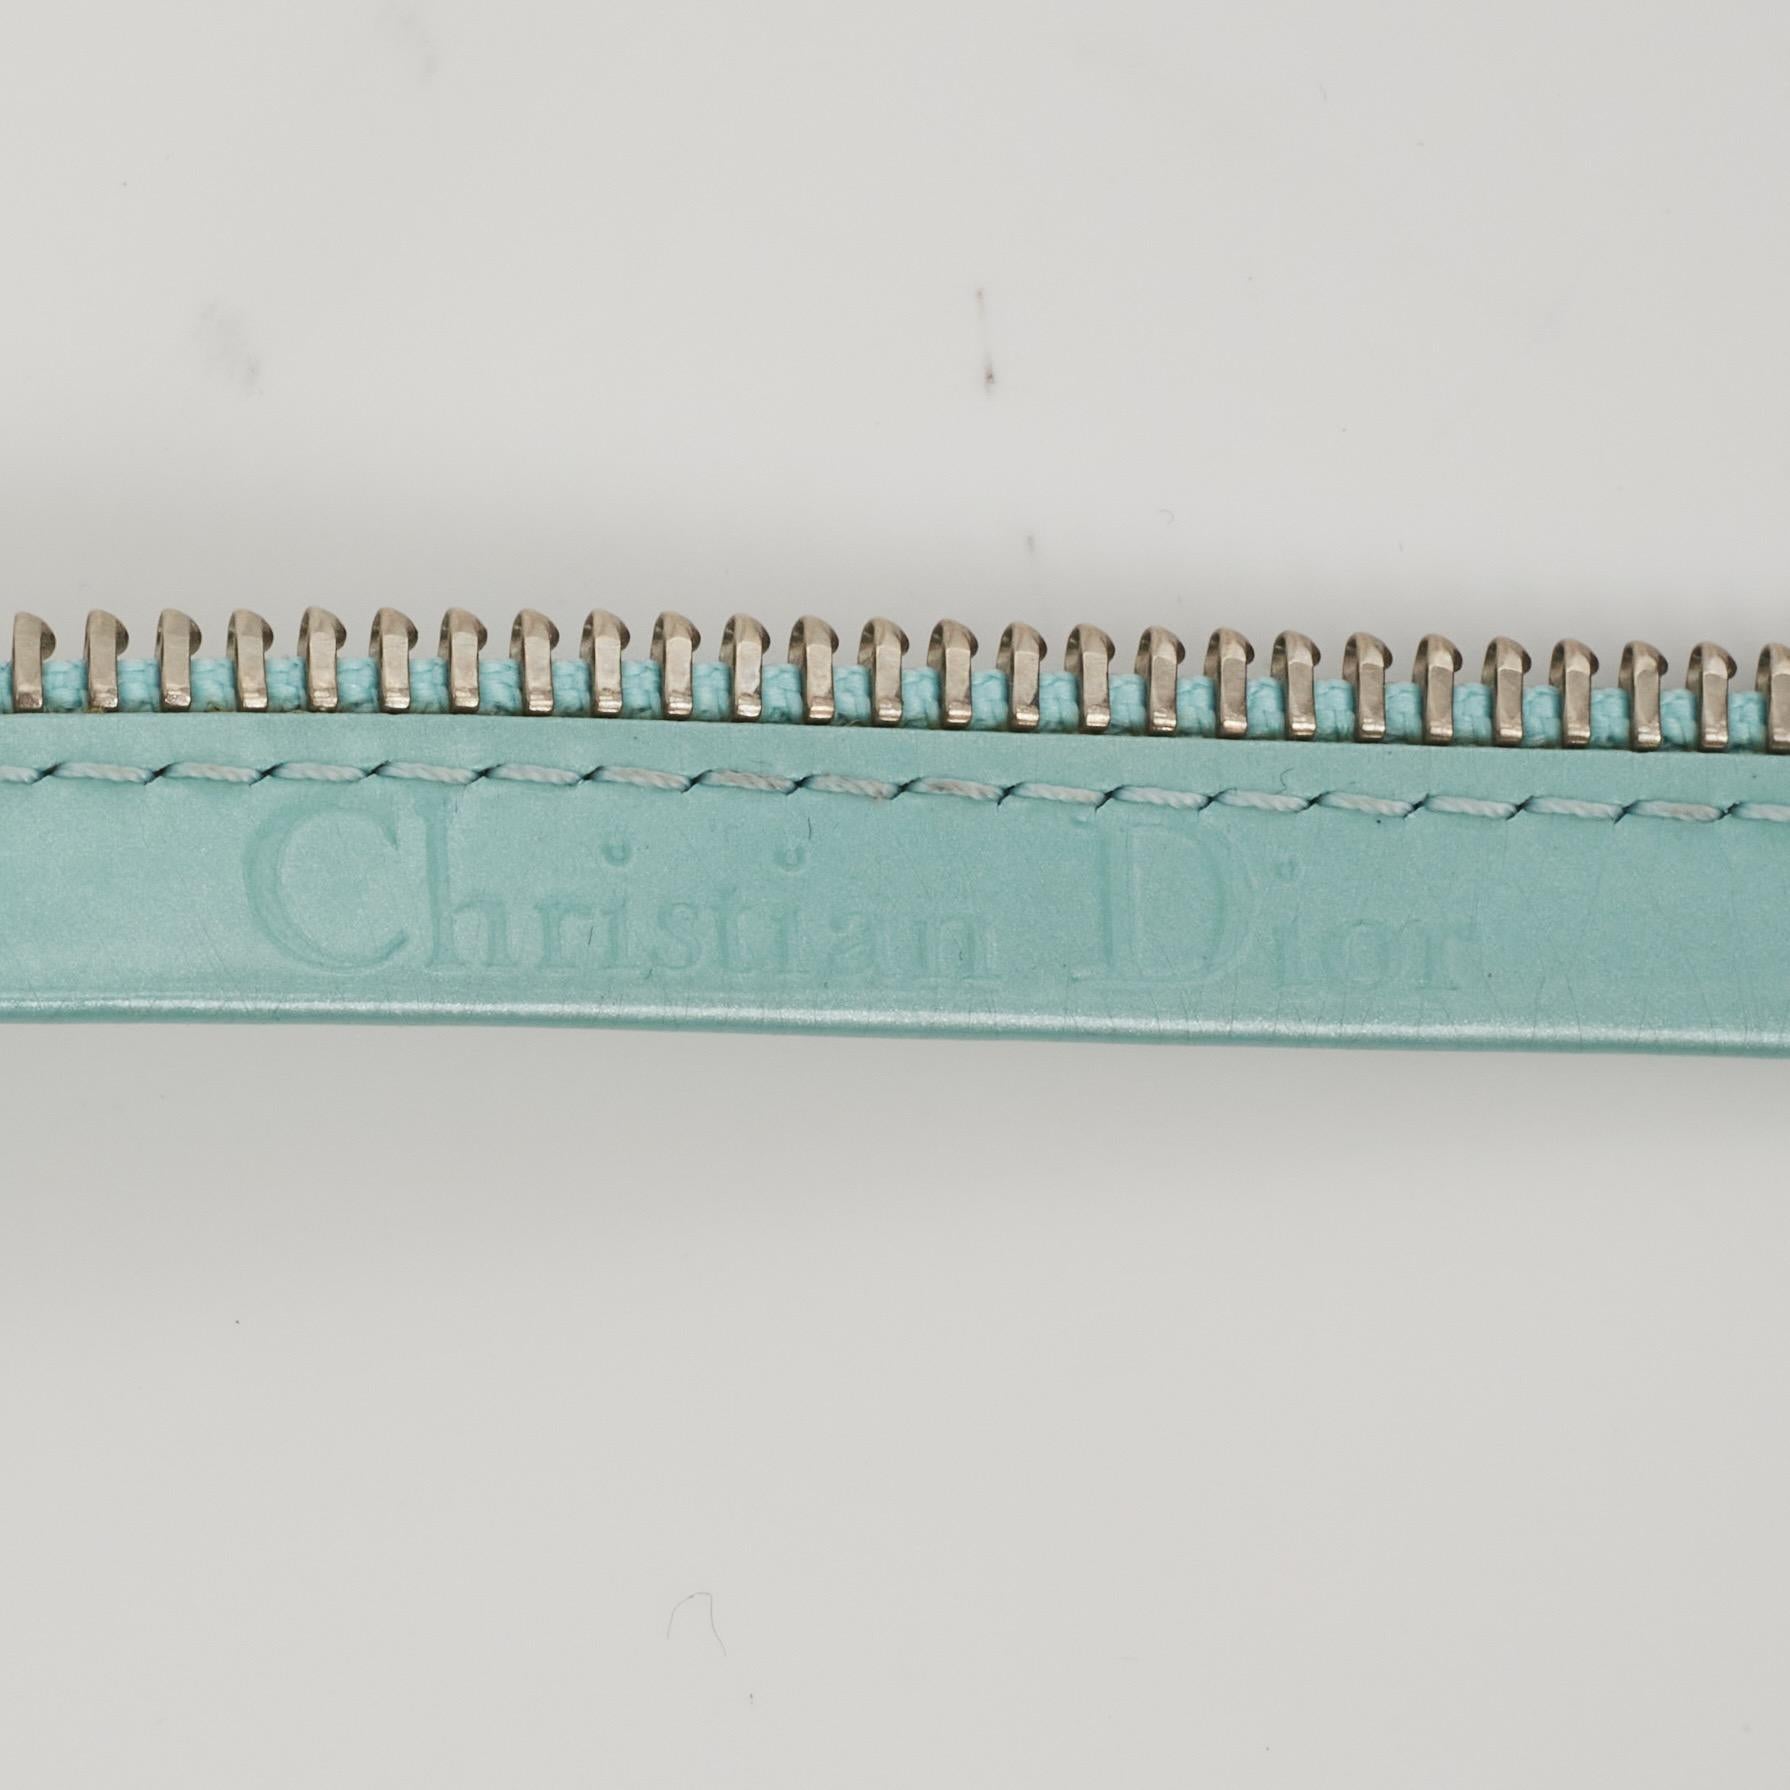 Dior Vintage Turquoise Leather Zipper Tie Necklace In Good Condition For Sale In Montreal, Quebec